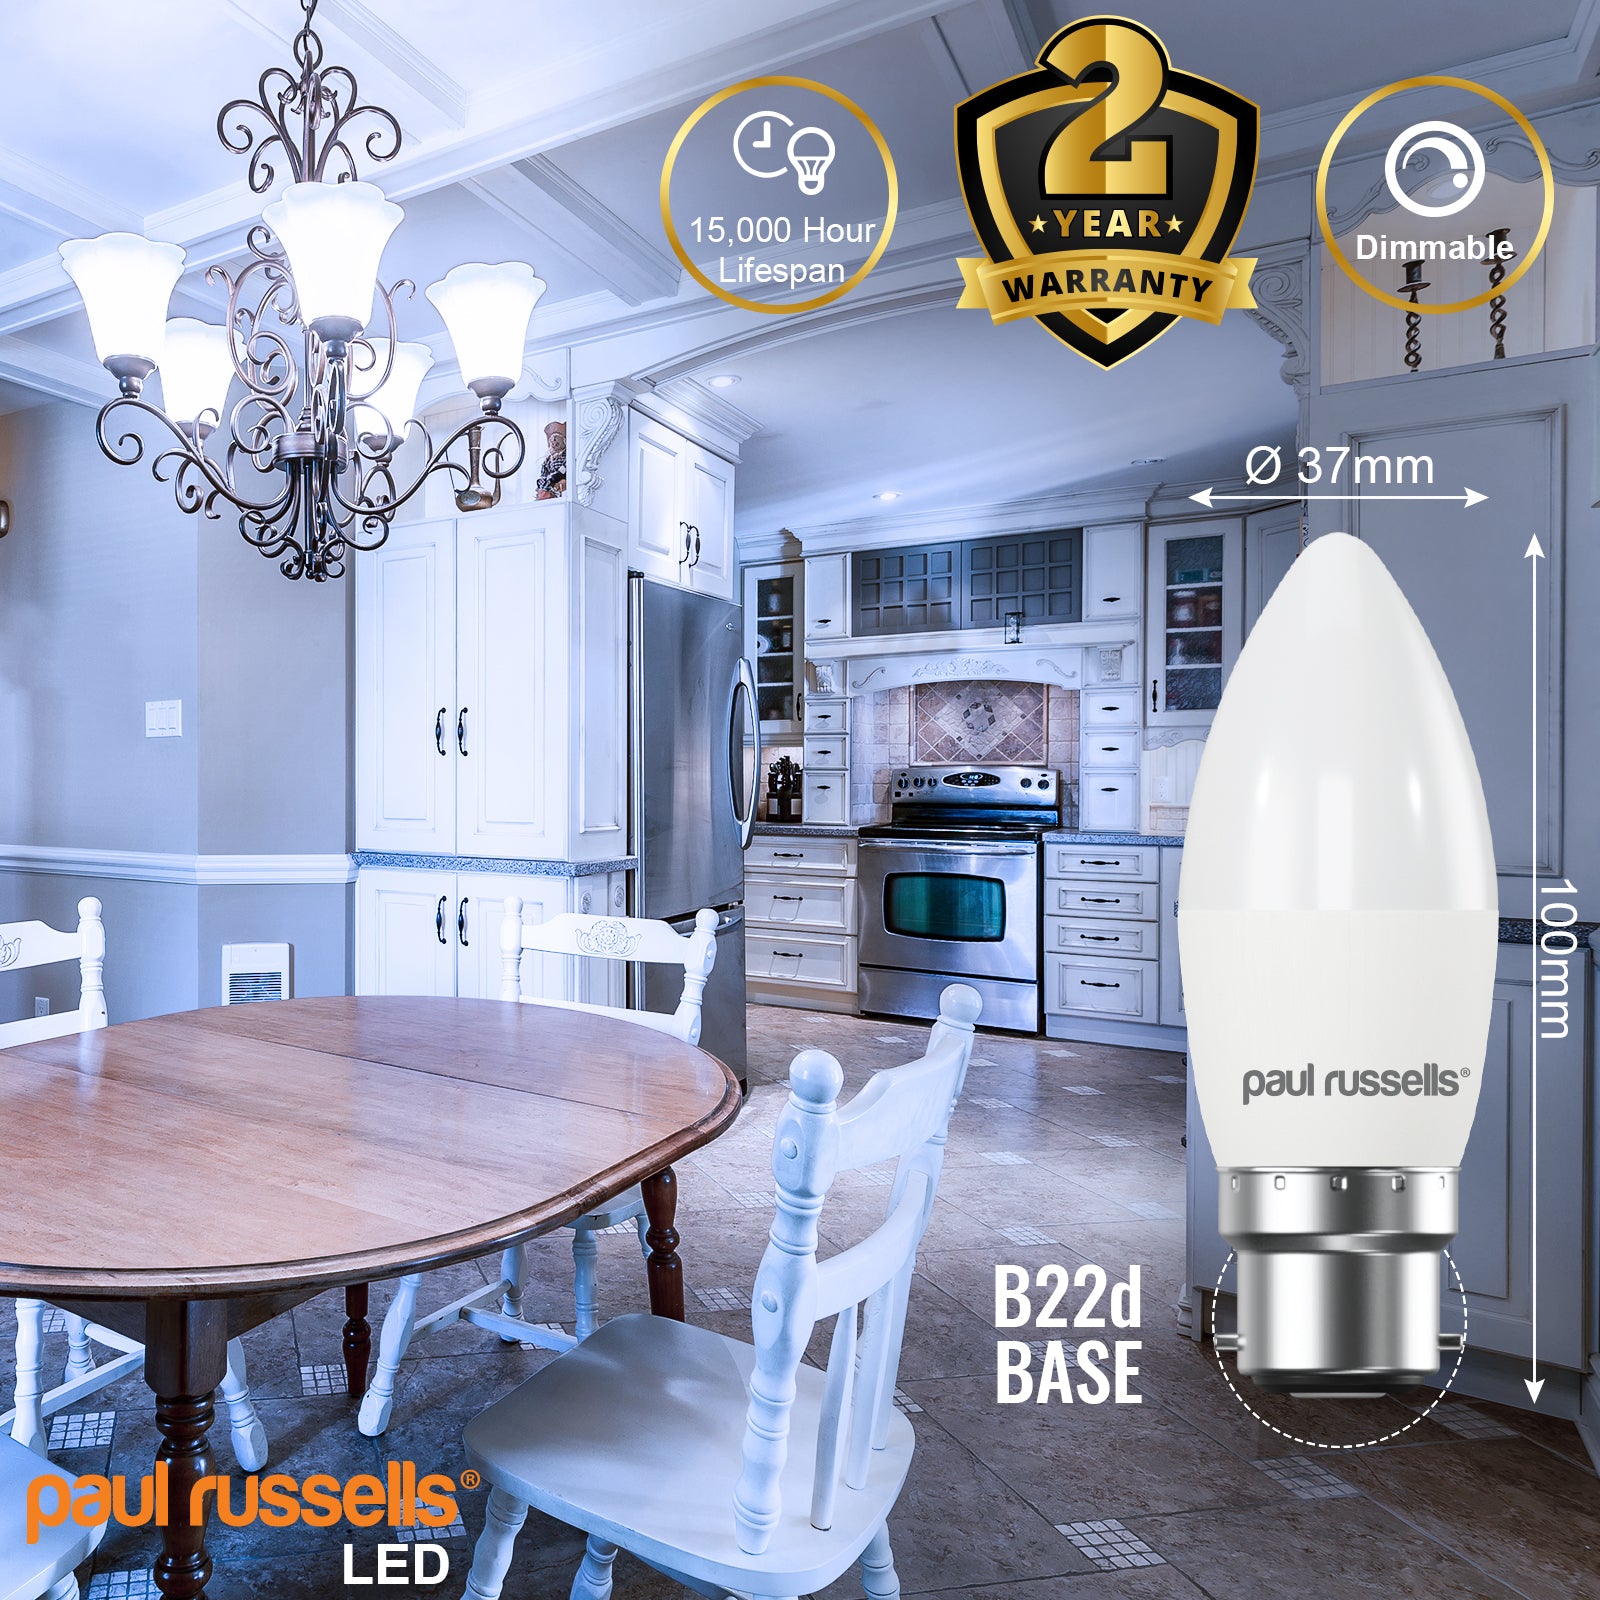 LED Dimmable Candle 5.5W=40W Day Light Bayonet Cap BC B22 Bulbs